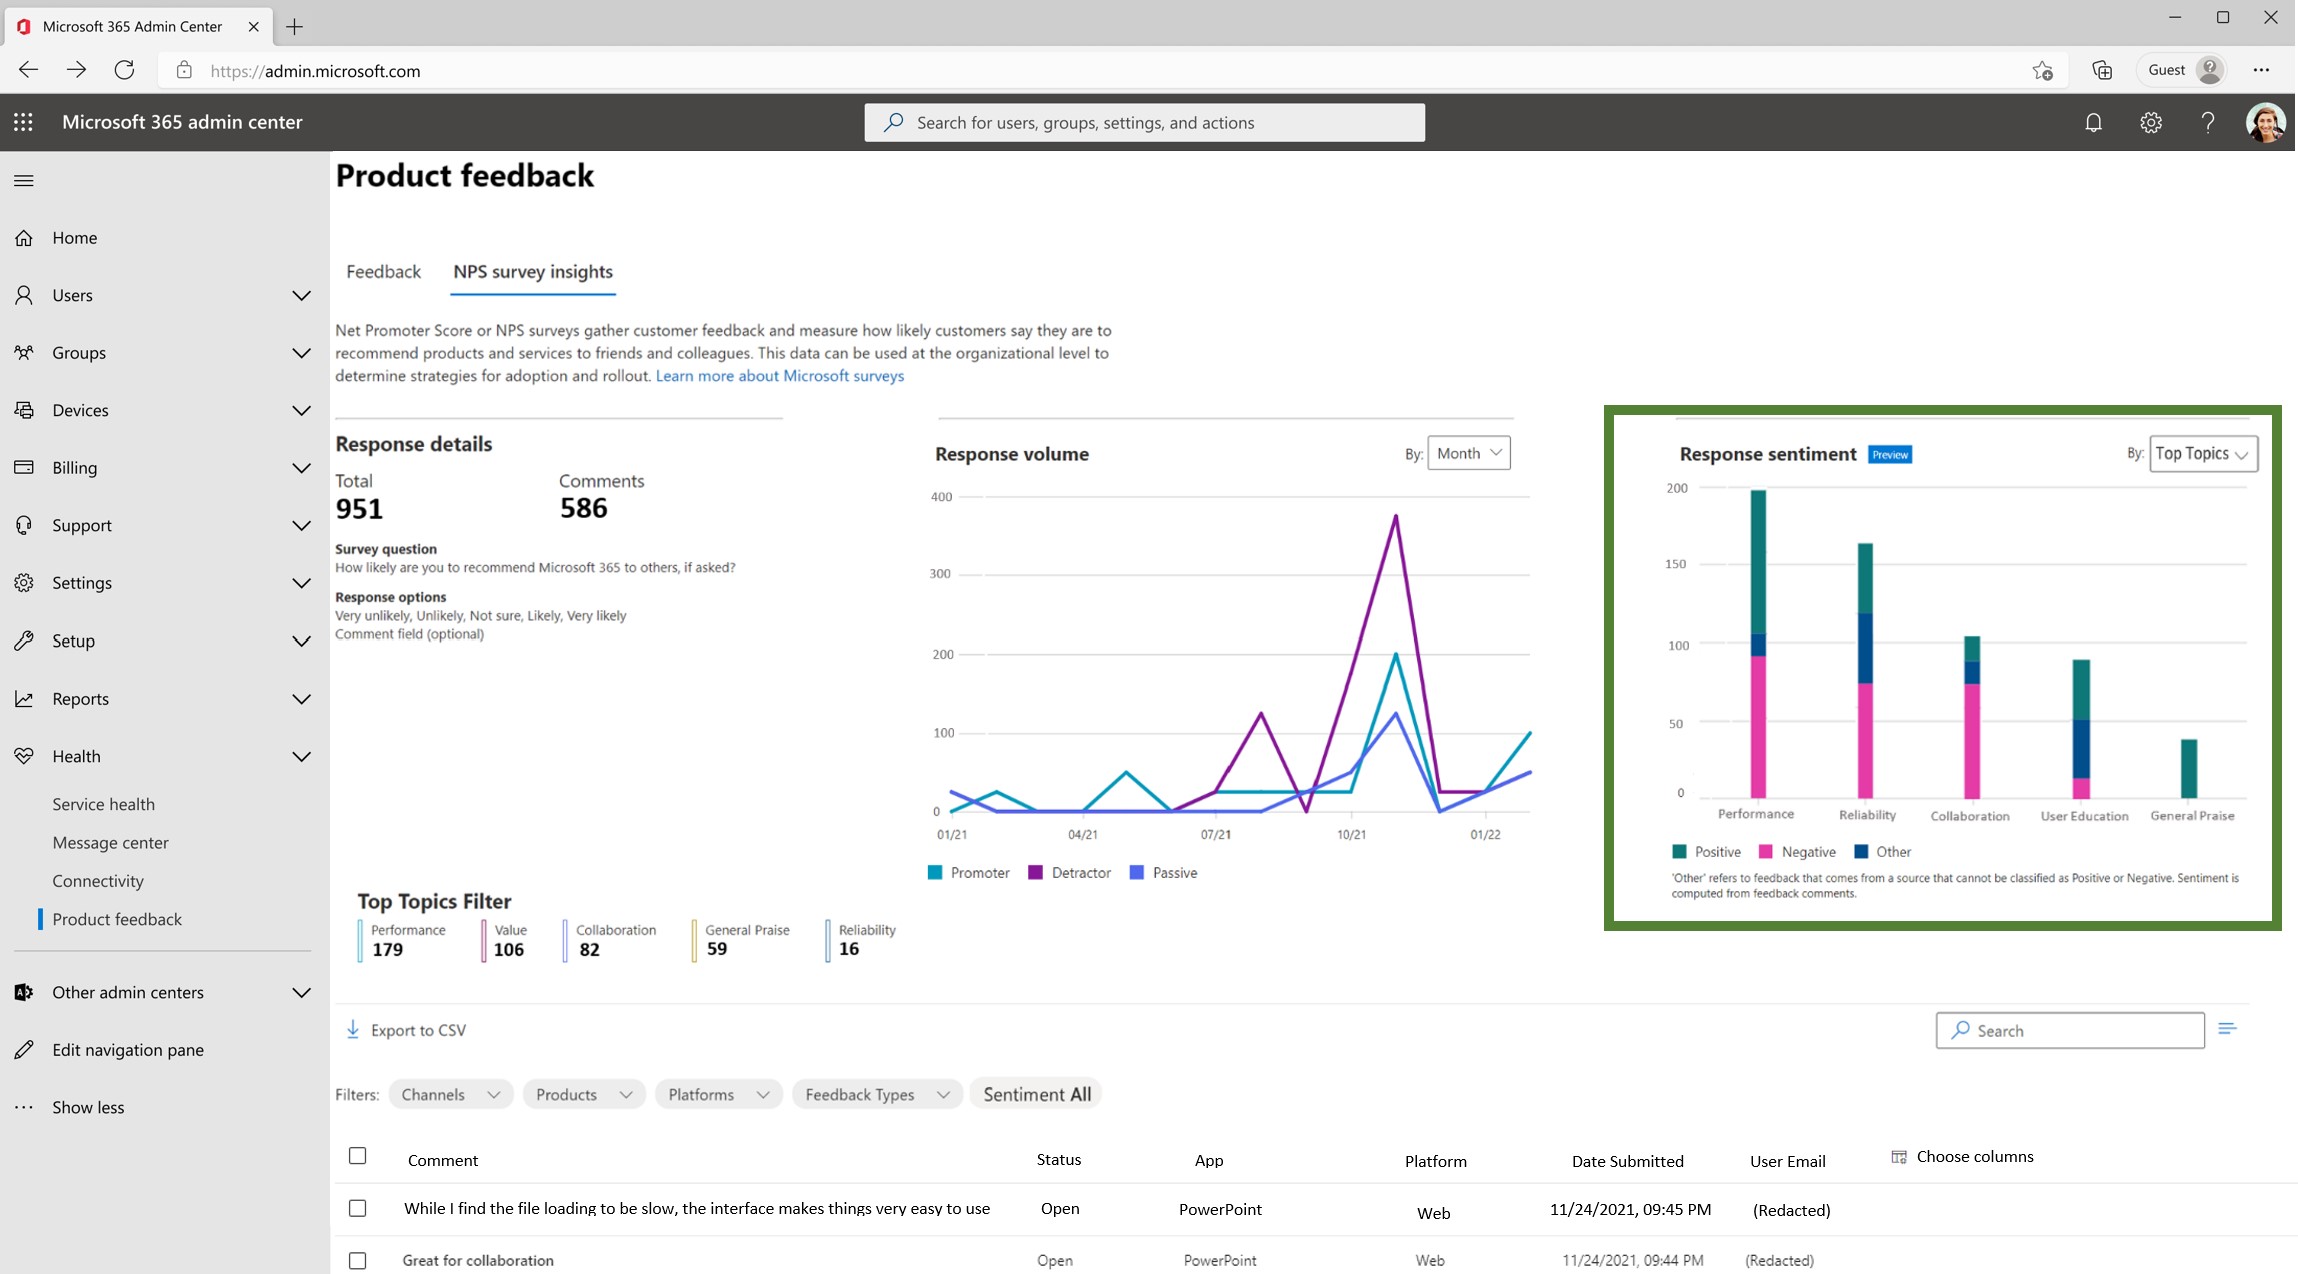 MC455195: Net Promoter Score (NPS) Sentiment Insights Per Topic Available to IT Administrators